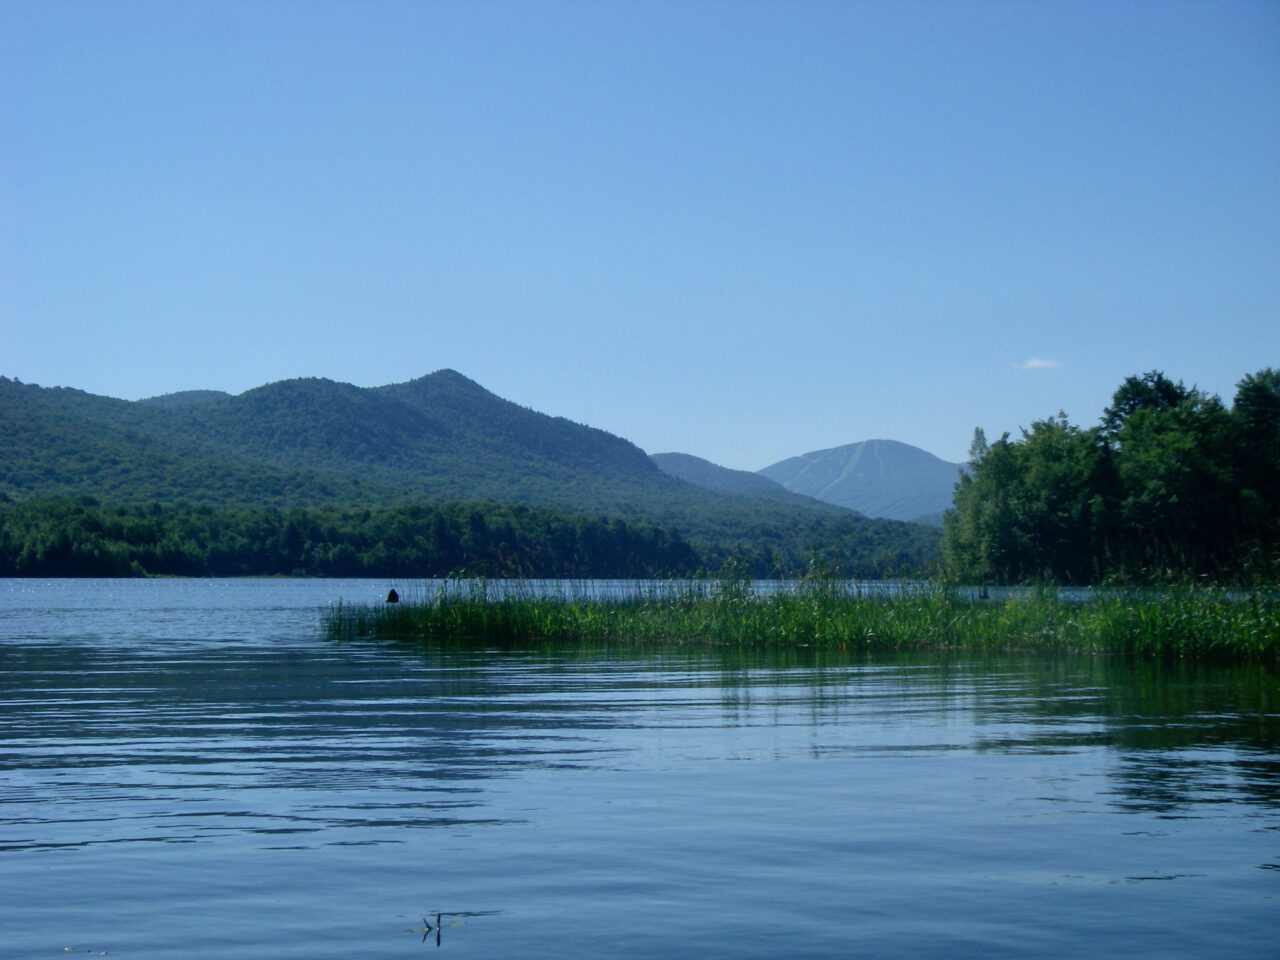 Smooth water and reeds at the Chittenden Reservoir with Pico Peak in the distance.